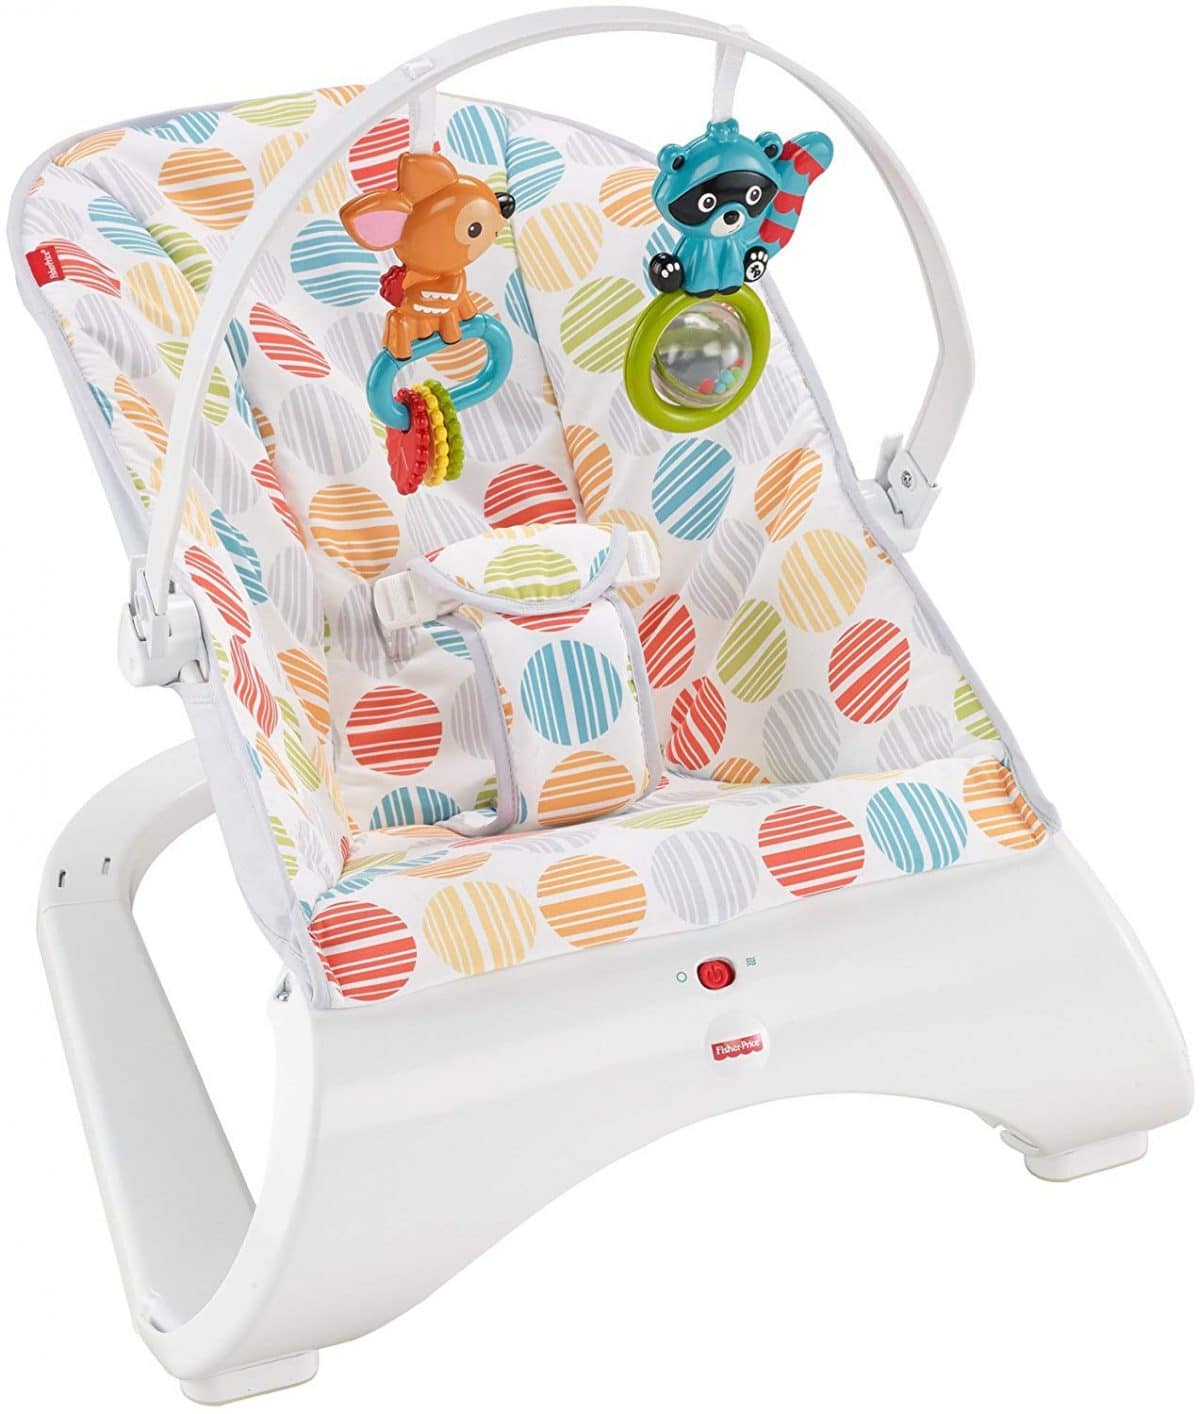 The 10 Best Baby Bouncer Seats To Buy 2020 Littleonemag